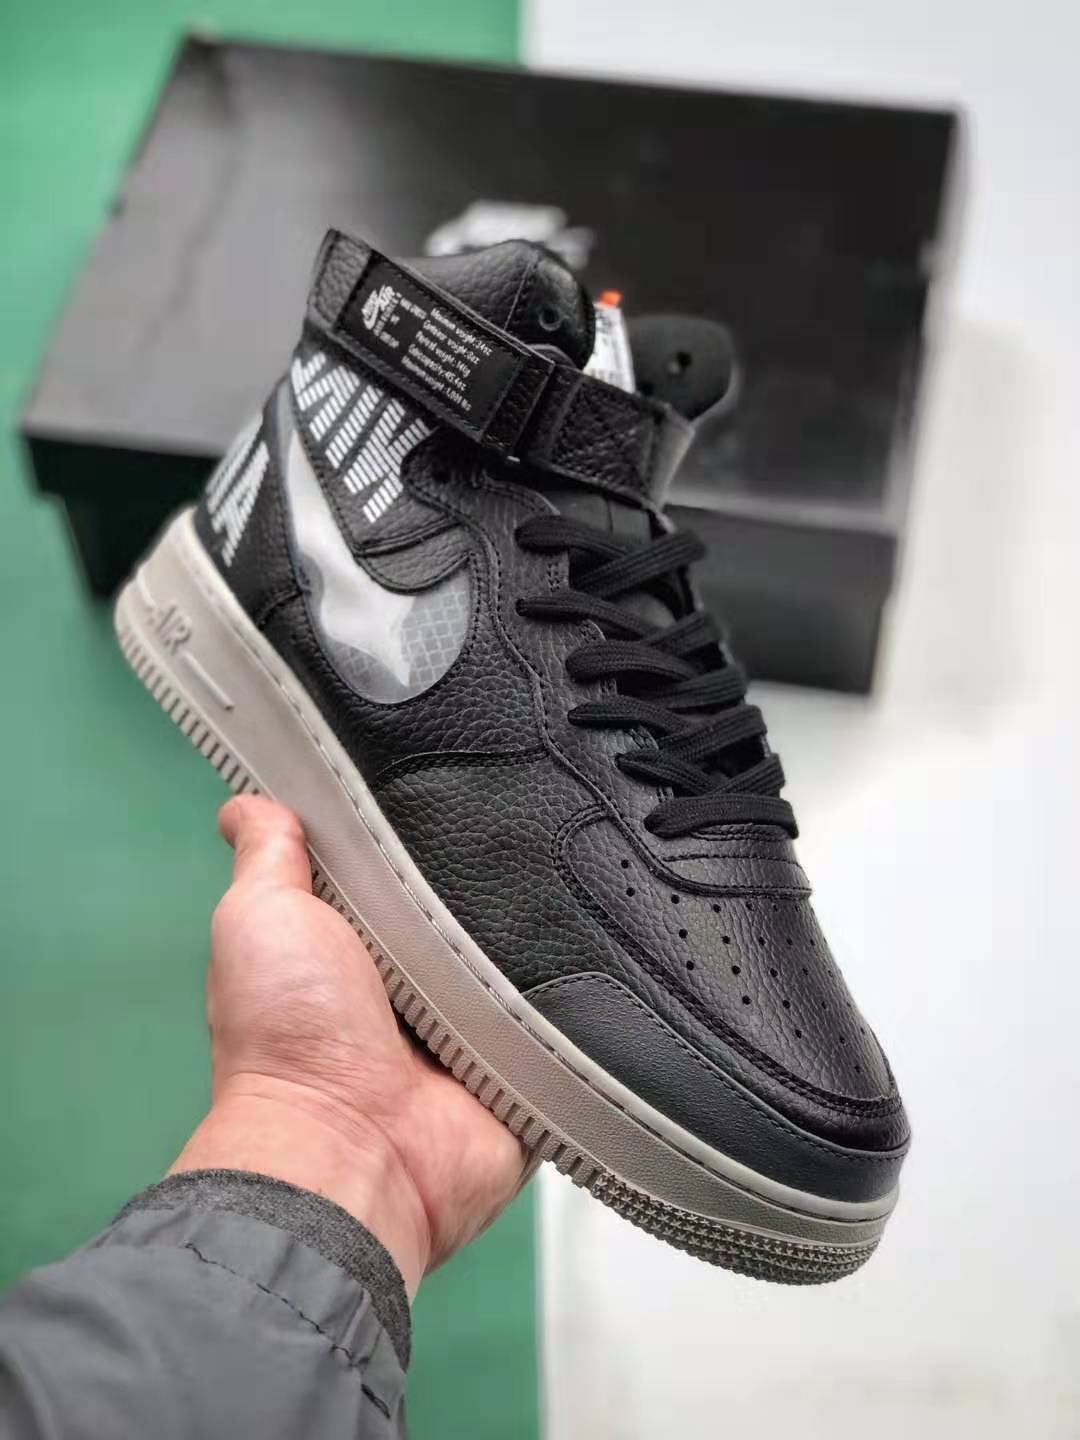 Nike Air Force 1 High 'Under Construction - Black' CQ0449-001: Durable Style for Urban Ready Looks